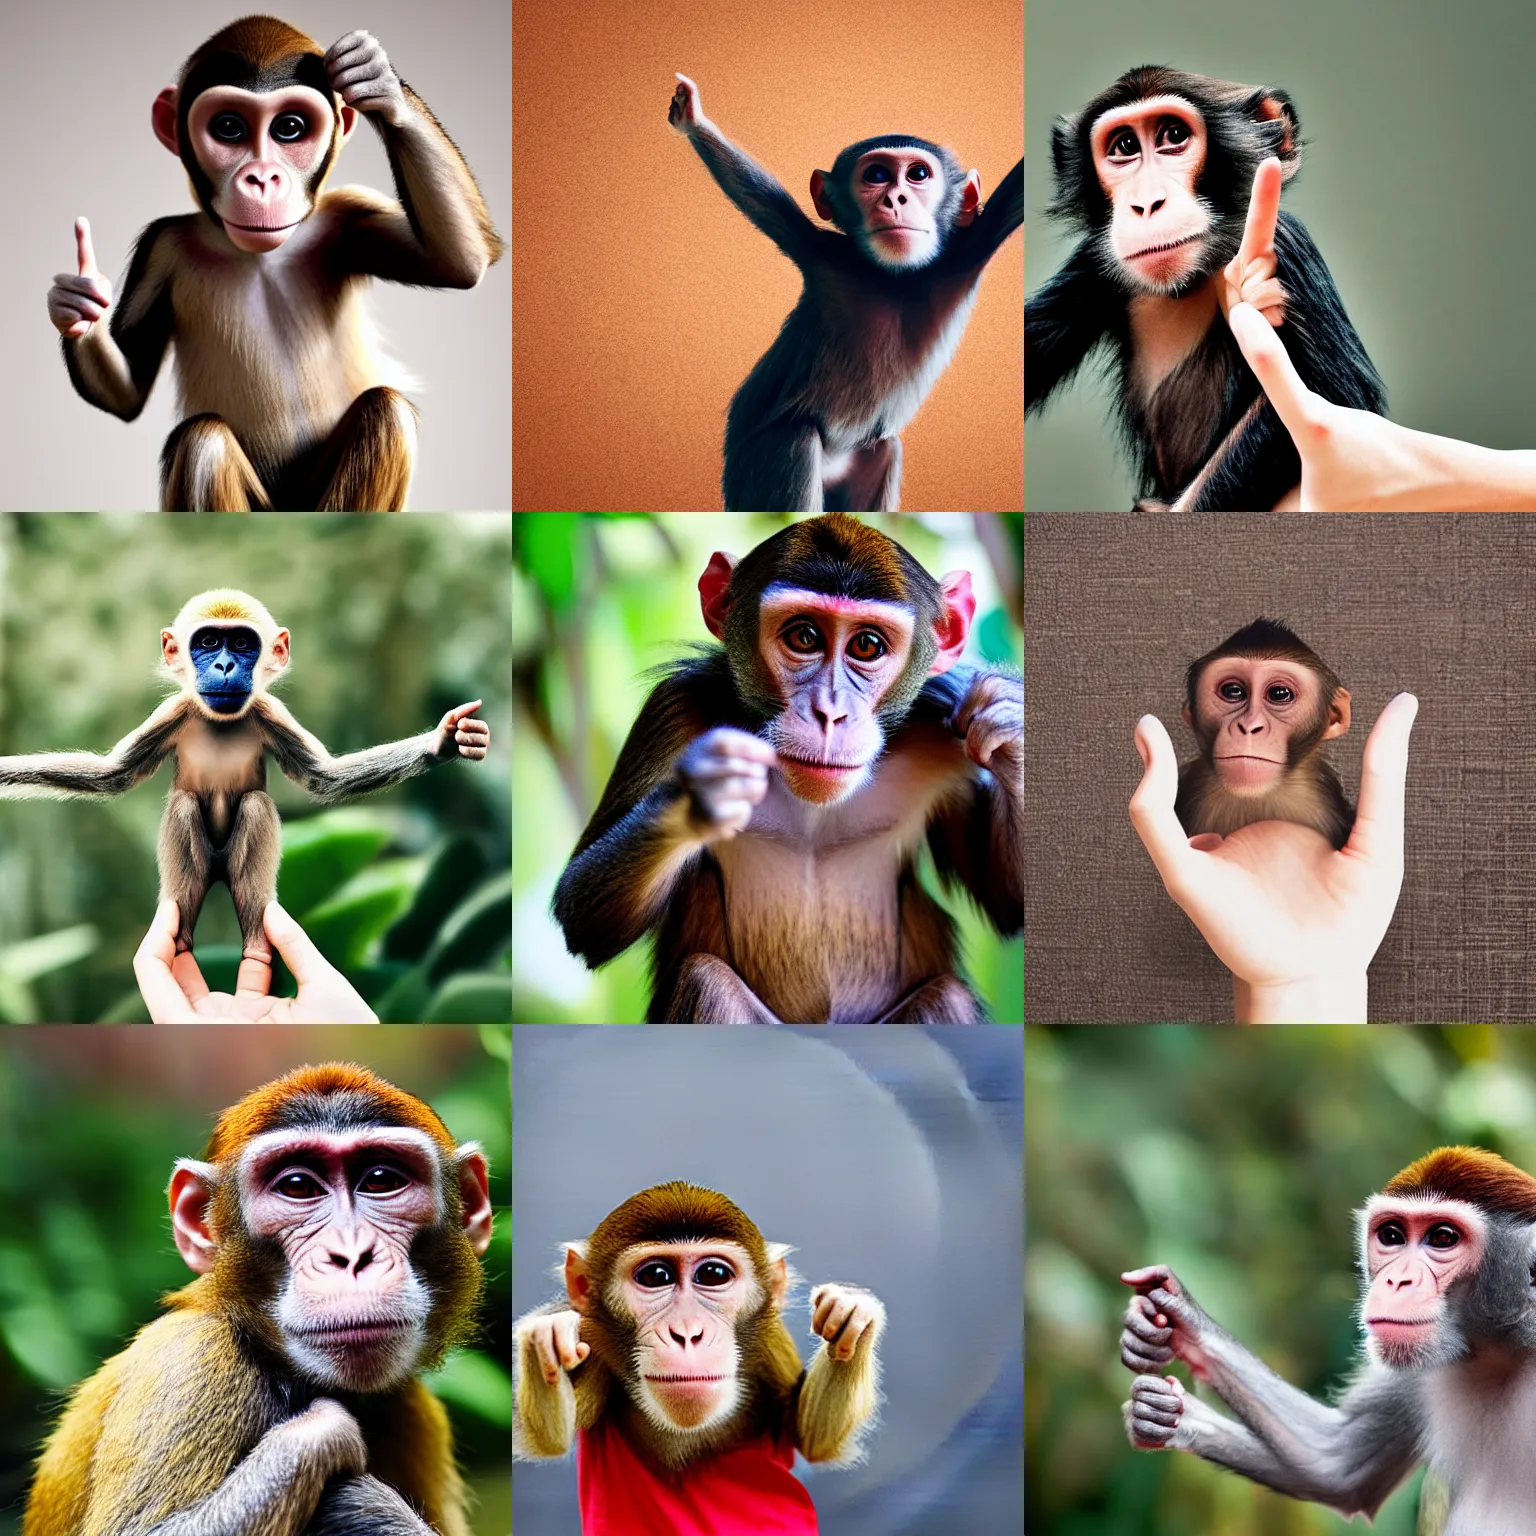 Prompt: a monkey holding up two fingers peace sign hand gesture